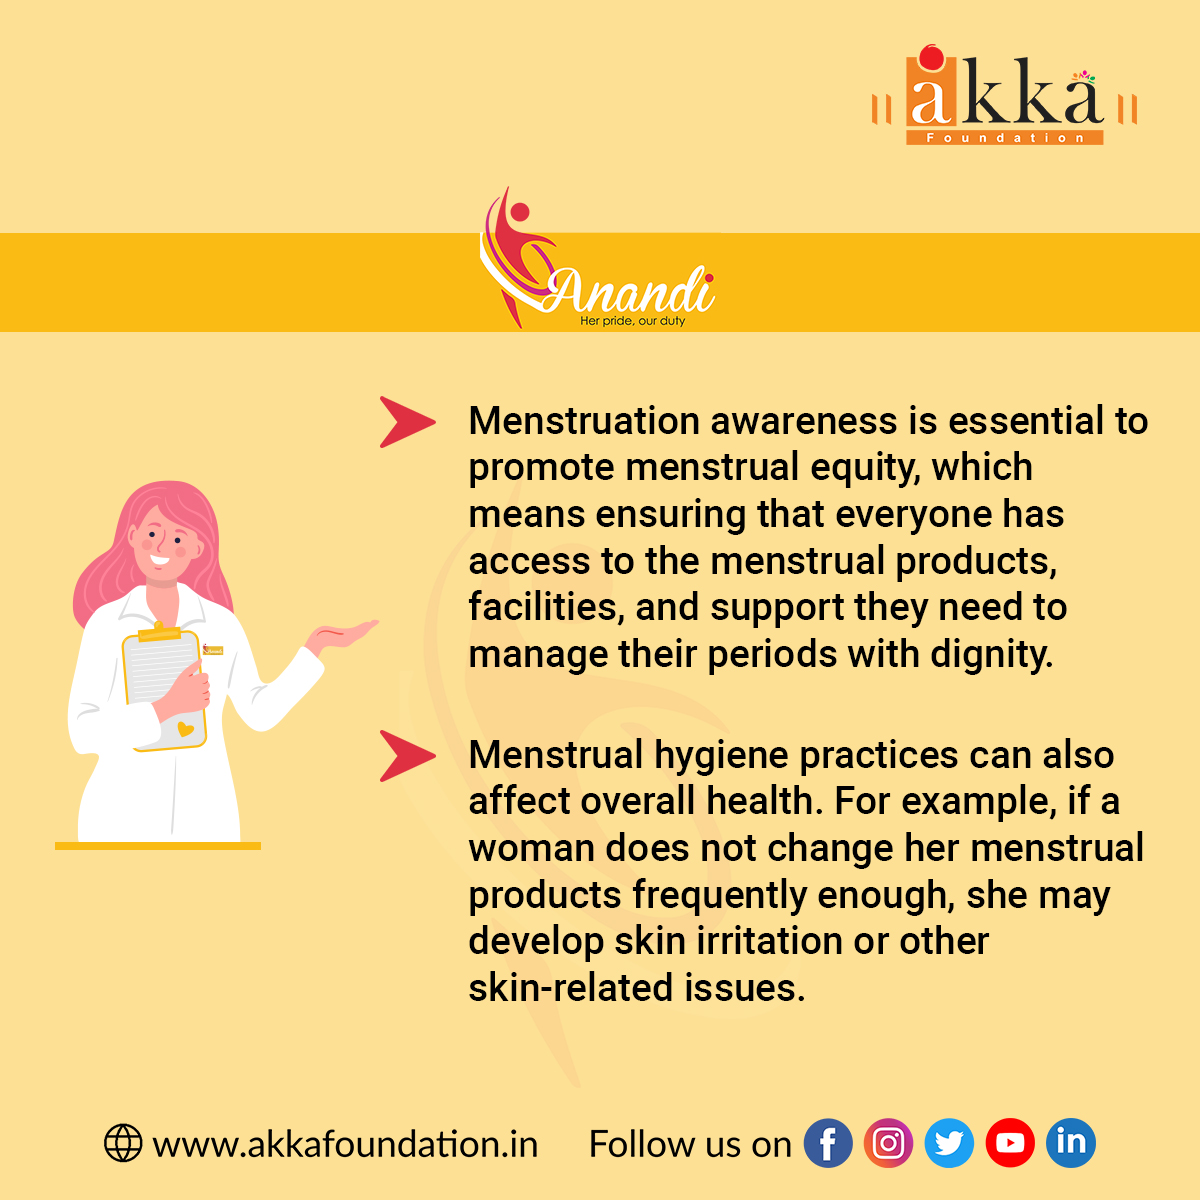 You may wonder why you must go through puberty, what menstruation is, and how to deal with it. These are all normal questions, and asking for help or guidance is okay. 
#AkkaFoundation #ProjectAnandi #menstruationmatters #menstruationhygienemanagement #hygieneawareness #periods